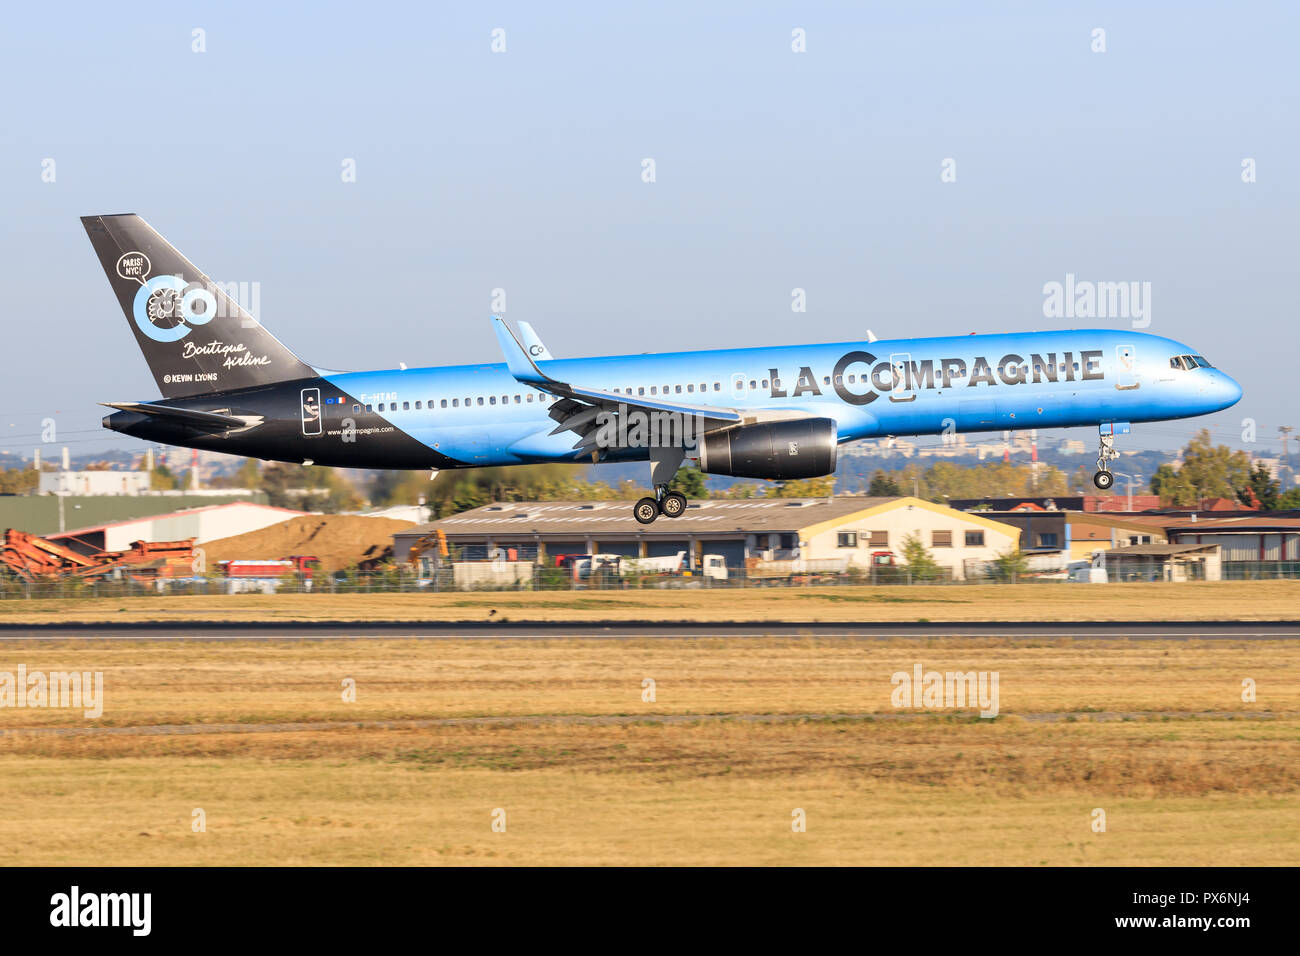 Paris/France October 9, 2018: Airbus A330 from La compagnie landing at Paris Airport. Stock Photo